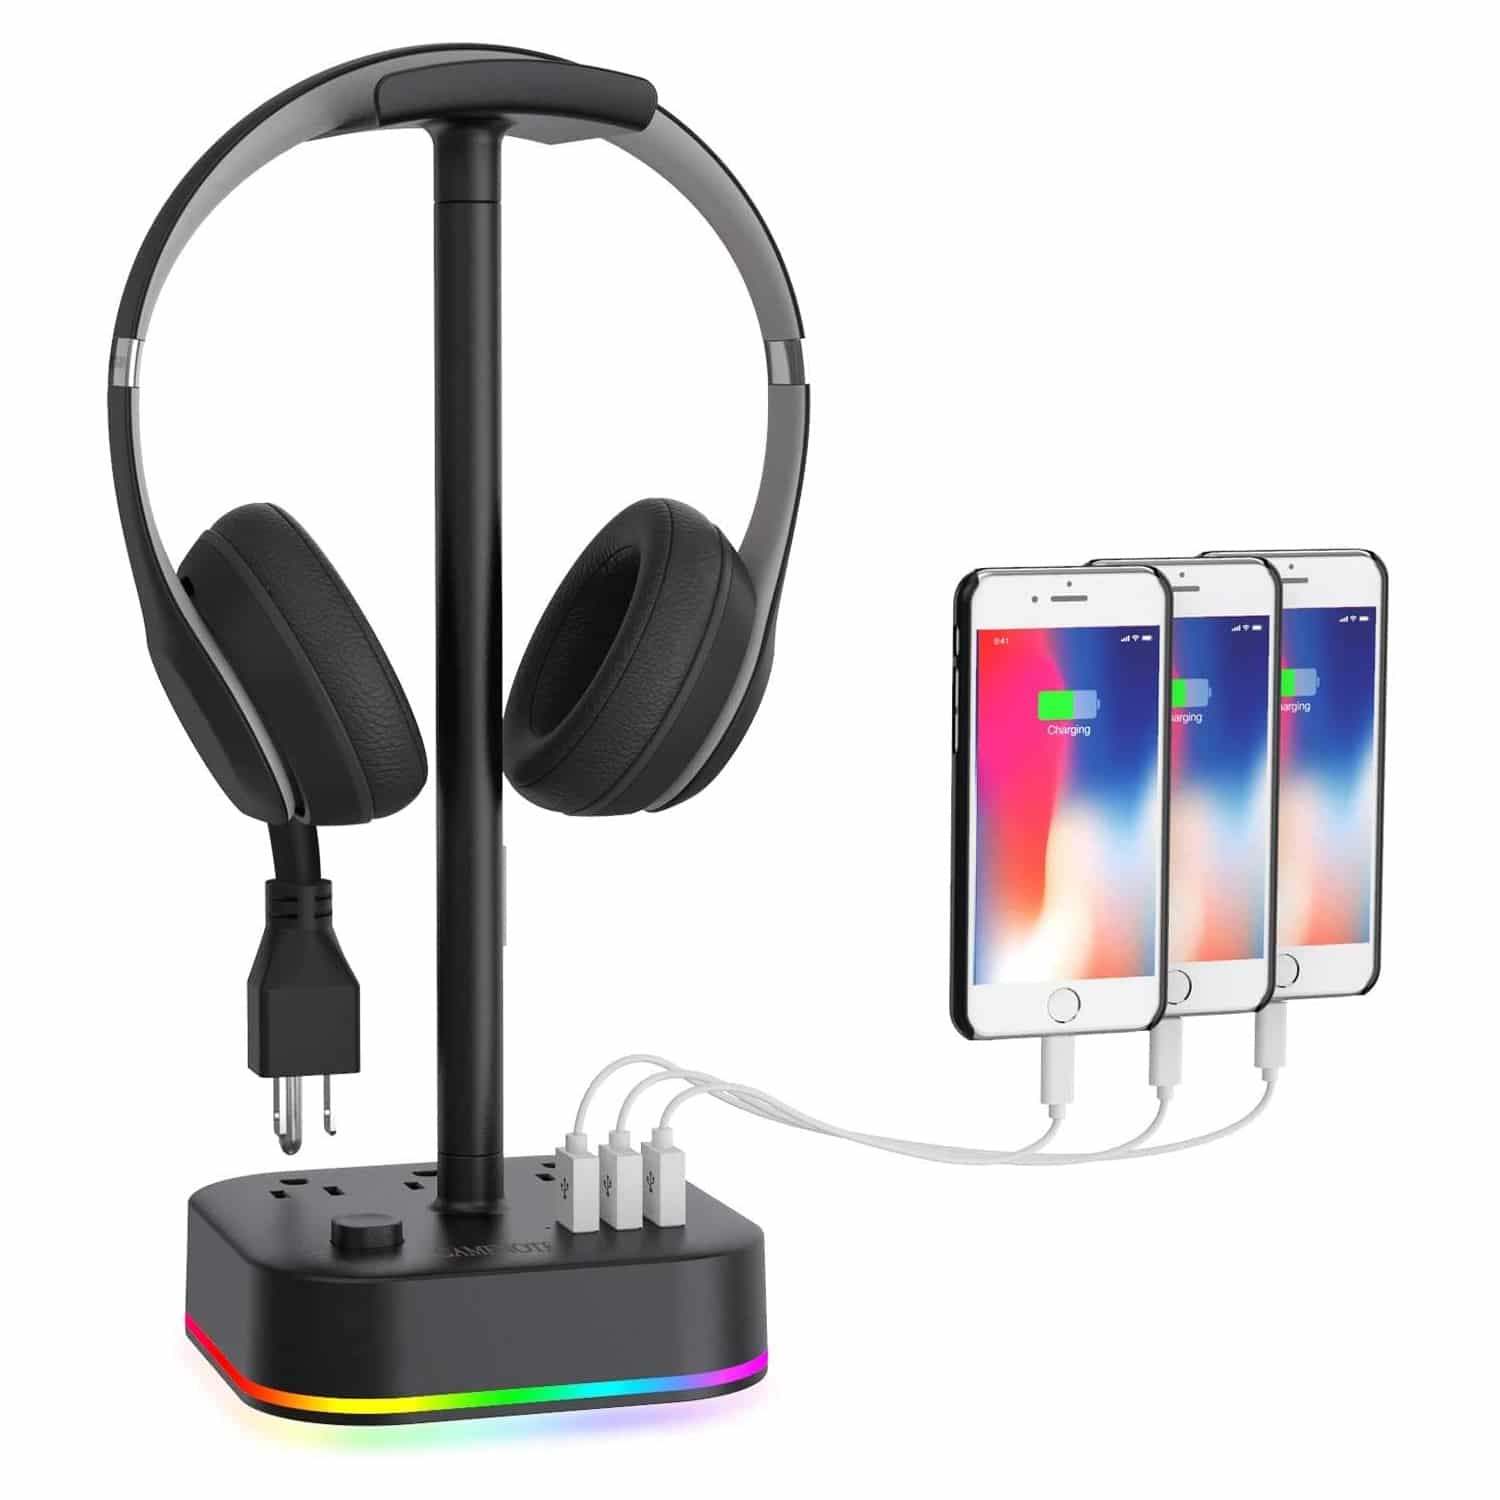 HAVIT DPM05 RGB Headset Stand with 3 USB Charging Ports & 3 Power Outlets  【US Only】